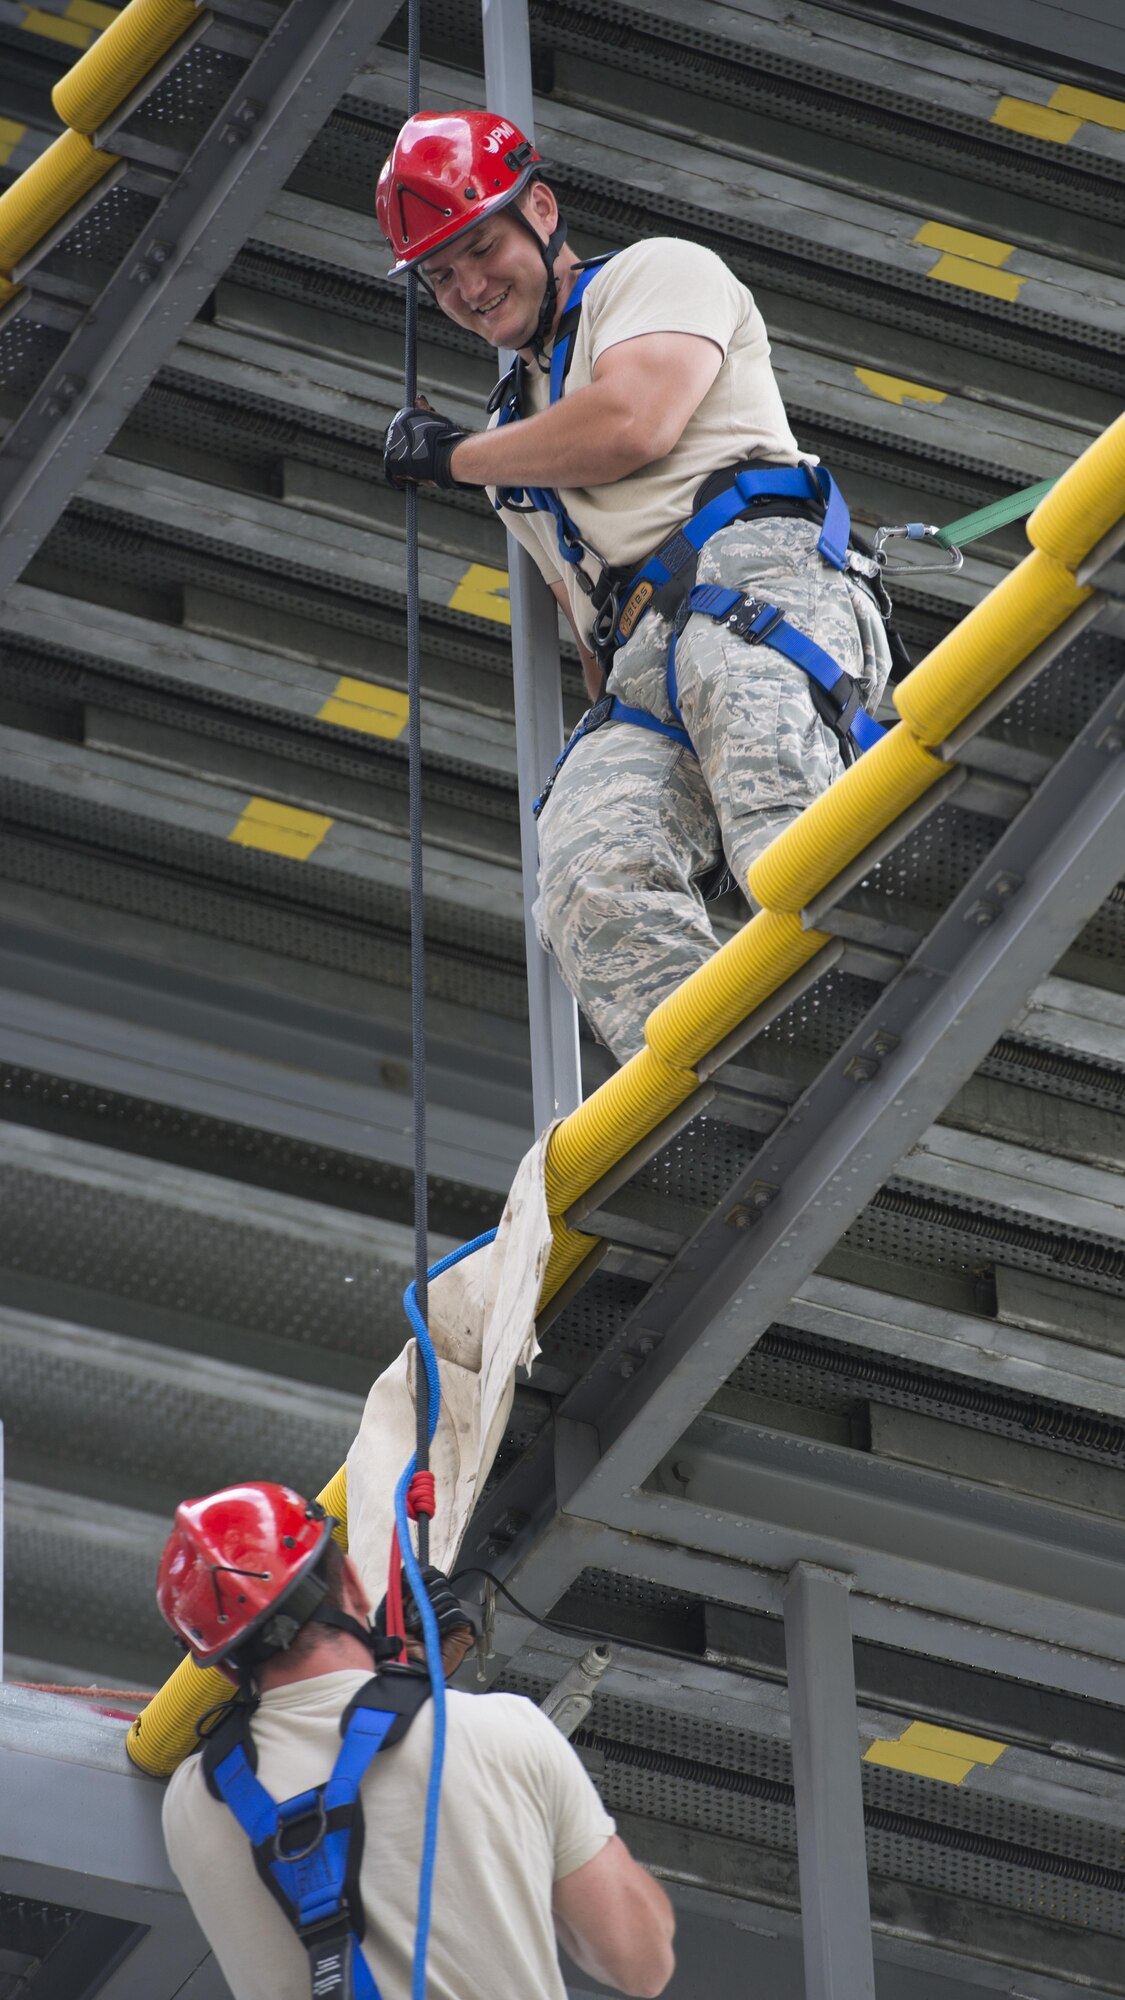 Senior Airman Dallas Gullion, 436th Civil Engineer Squadron firefighter, guides a rope while another firefighter practices ascending and repelling during a Rescue Technician Course Aug. 18, 2016, at Dover Air Force Base, Del. Upon completion of this course, students are National Fire Protection Association certified rope rescue and confined space rescue technicians. (U.S. Air Force photo by Senior Airman Zachary  Cacicia)